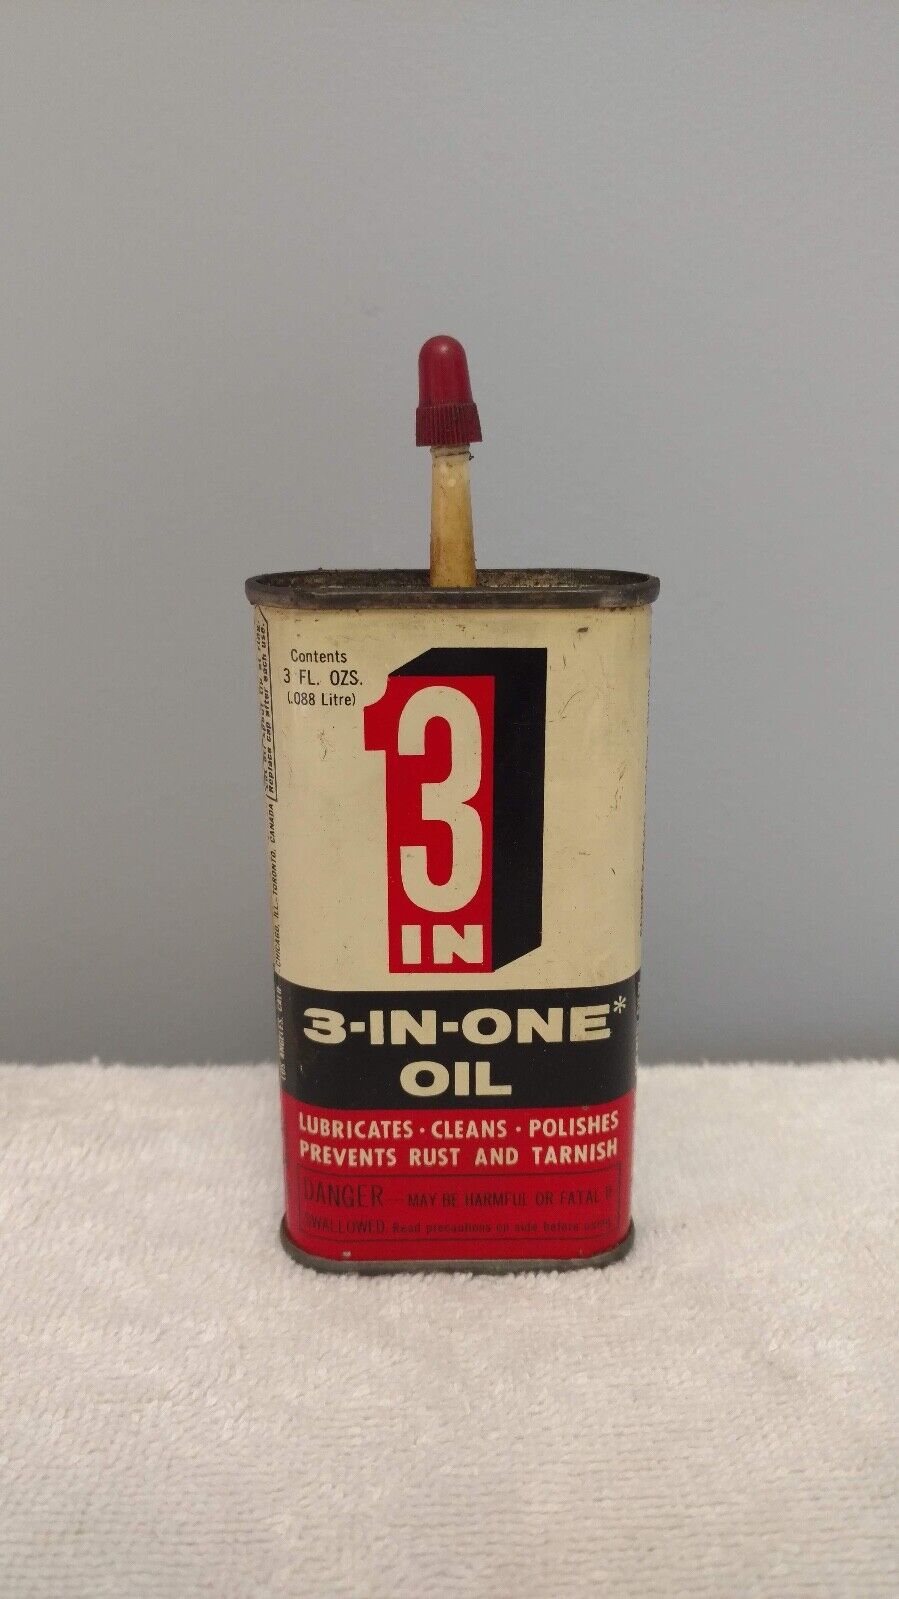 Vintage 3-In-One Oil Can 3FL OZ